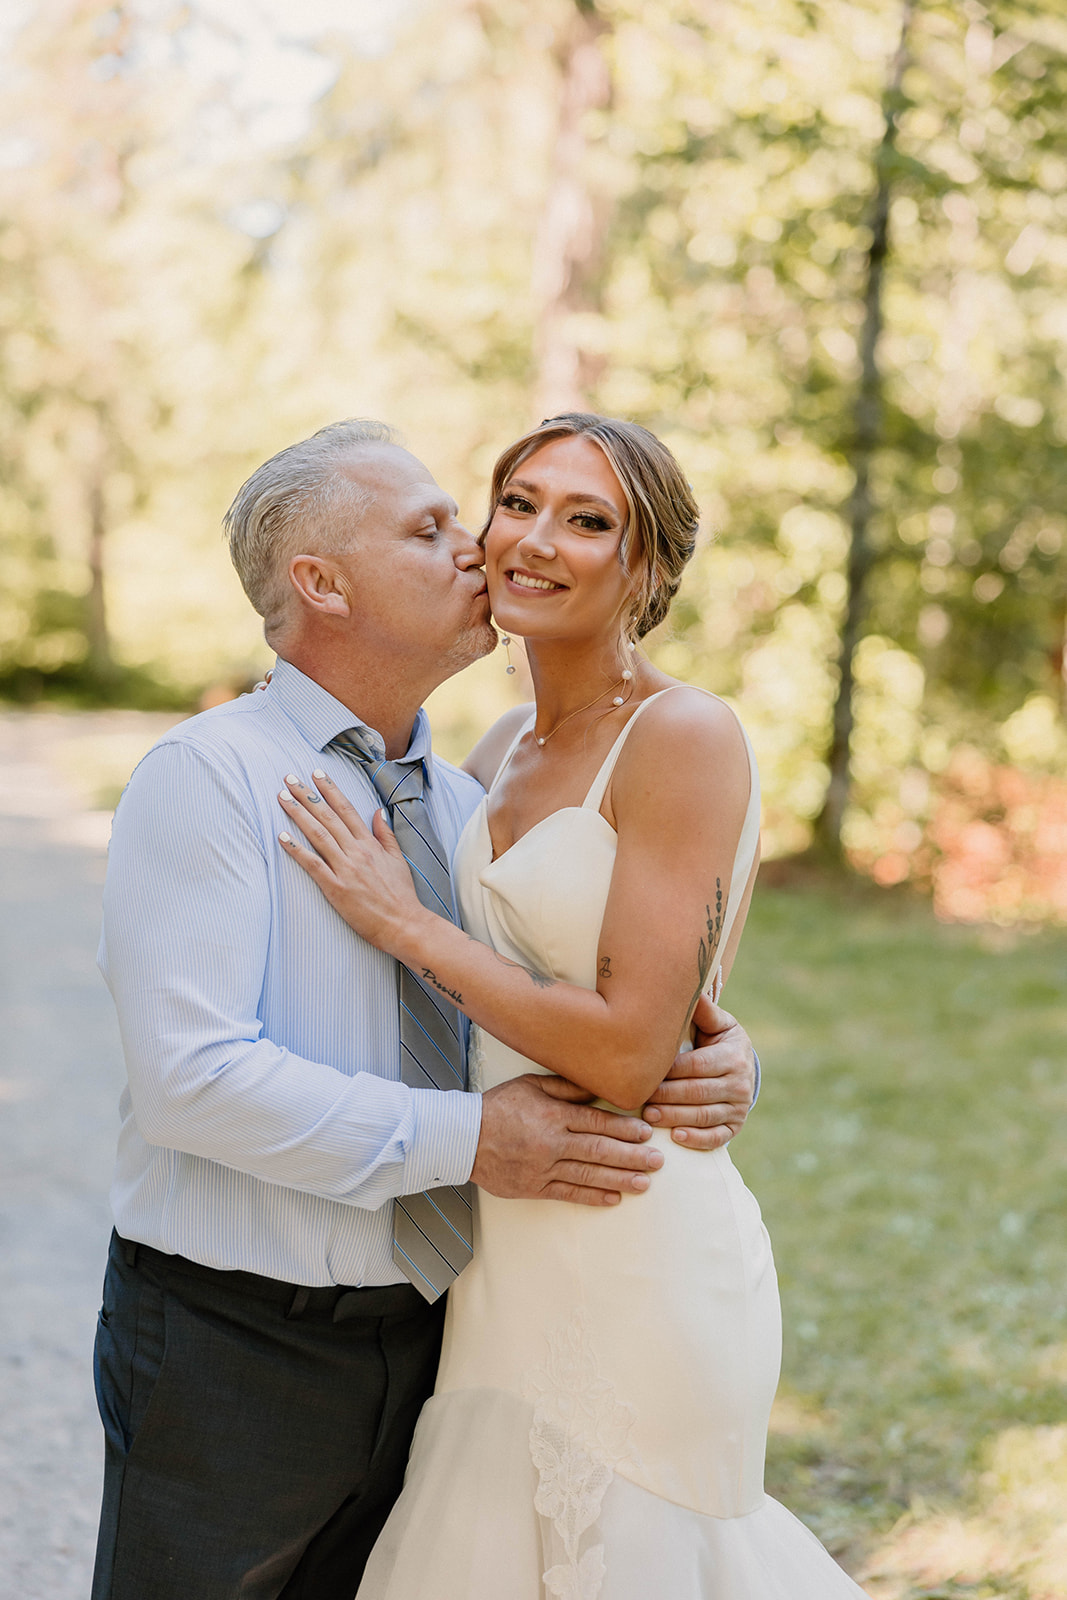 brides father kissing her on the cheek Camp Colton - A Mystical Oregon Wedding Venue